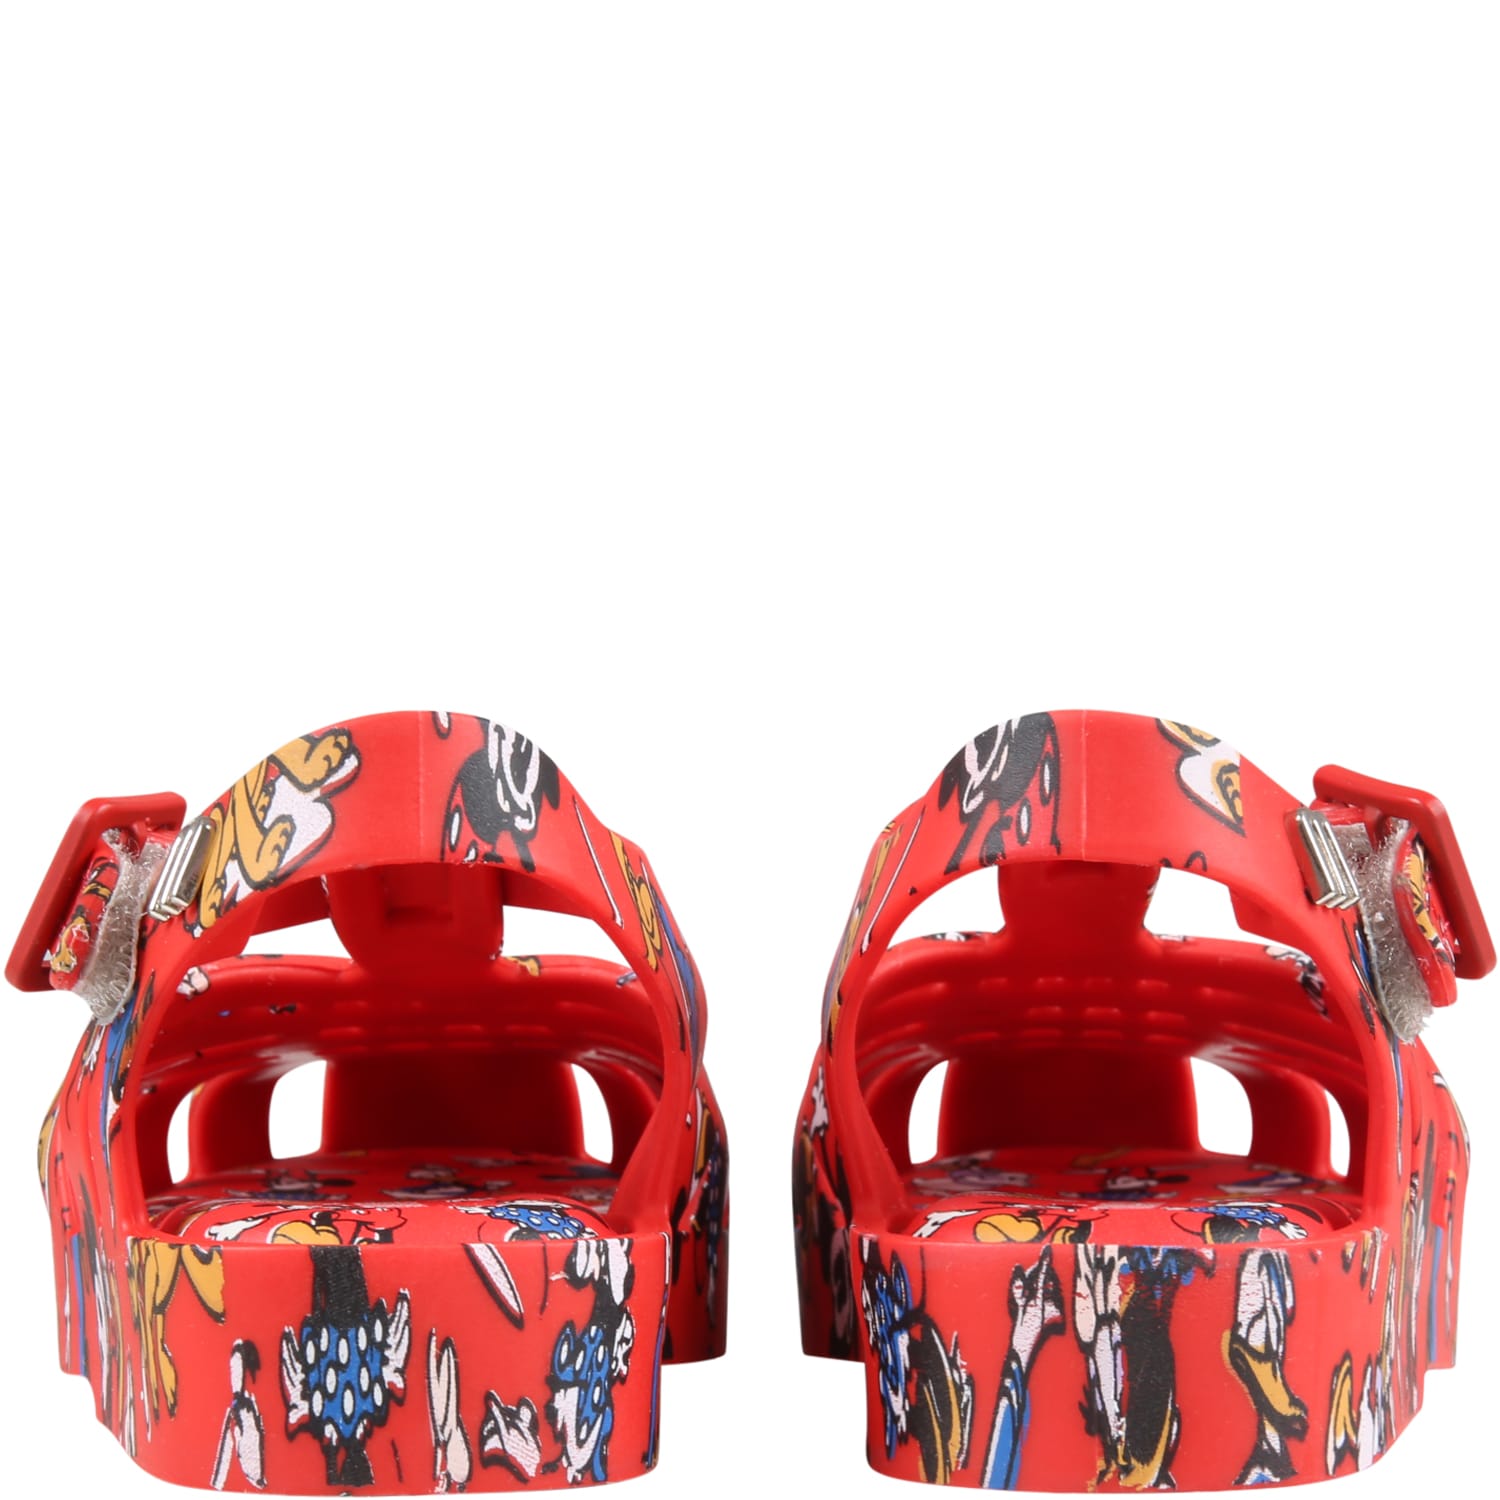 Shop Melissa Red Sandals For Boy With Disney Characters